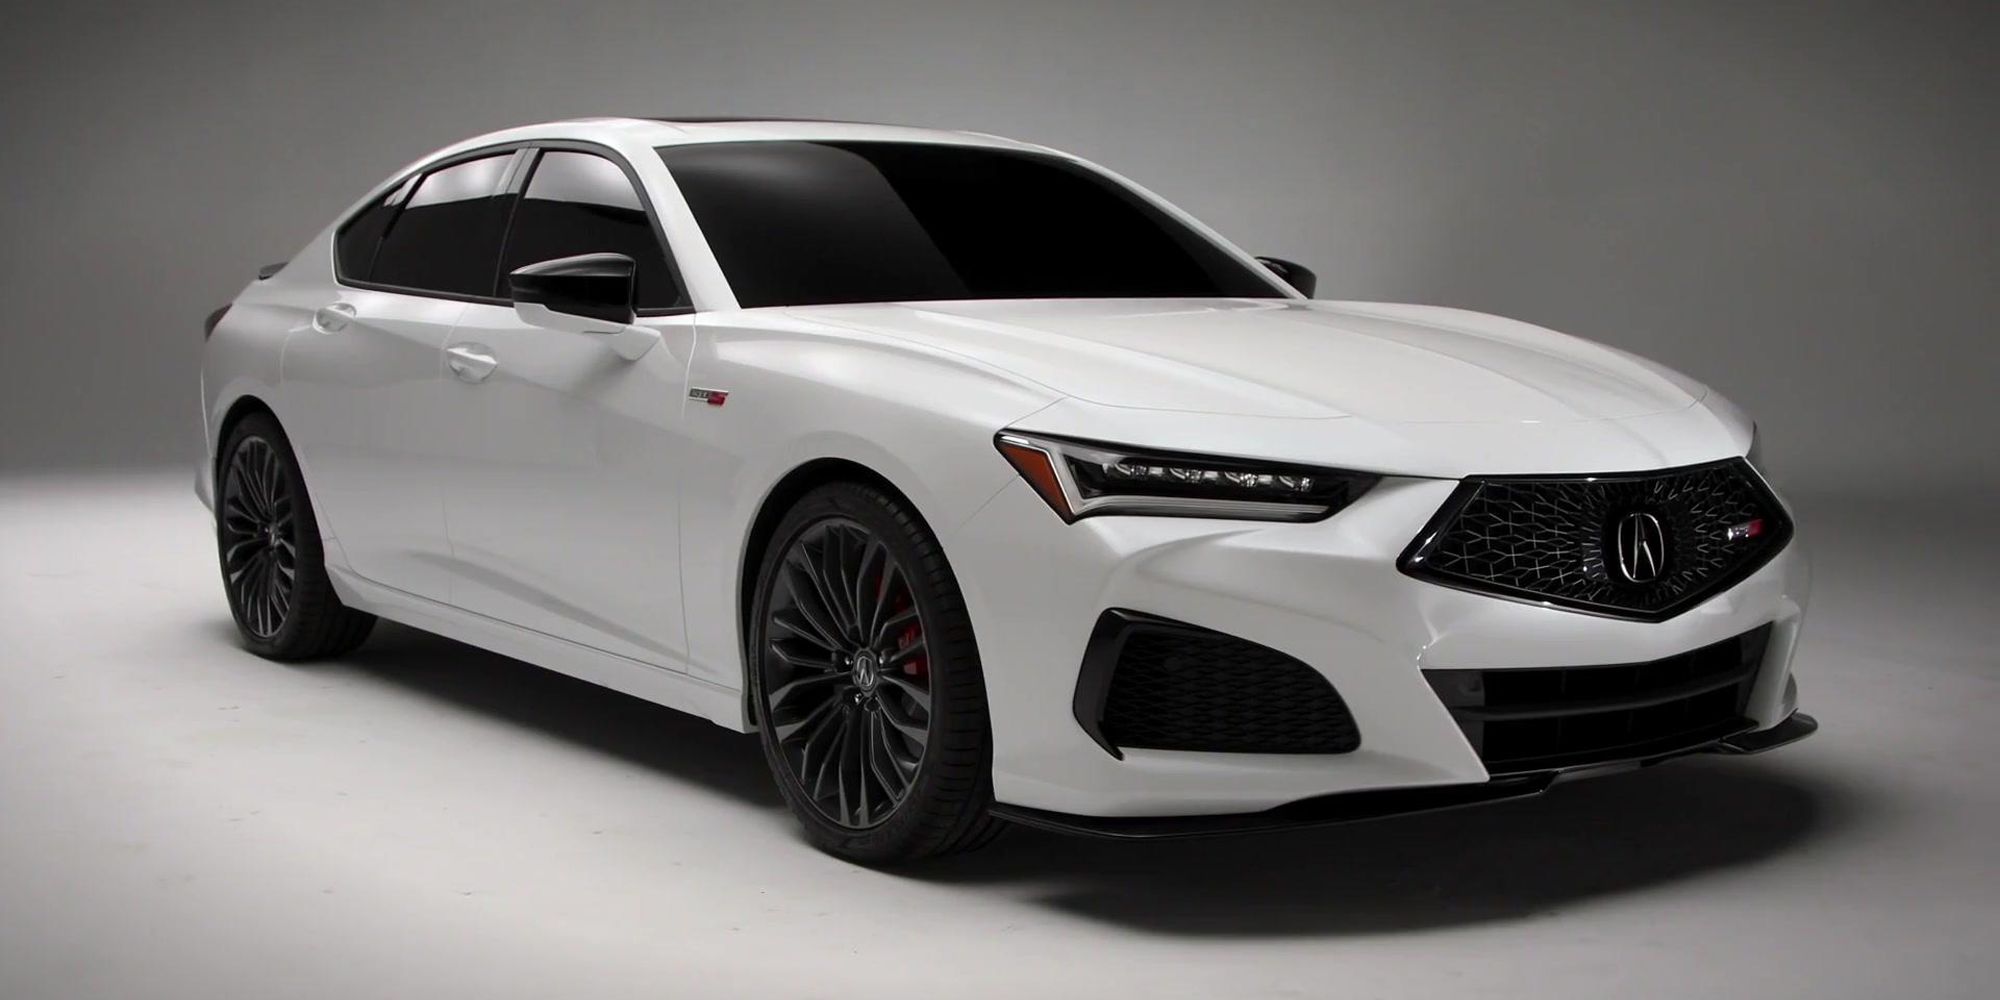 The TLX Type S in white